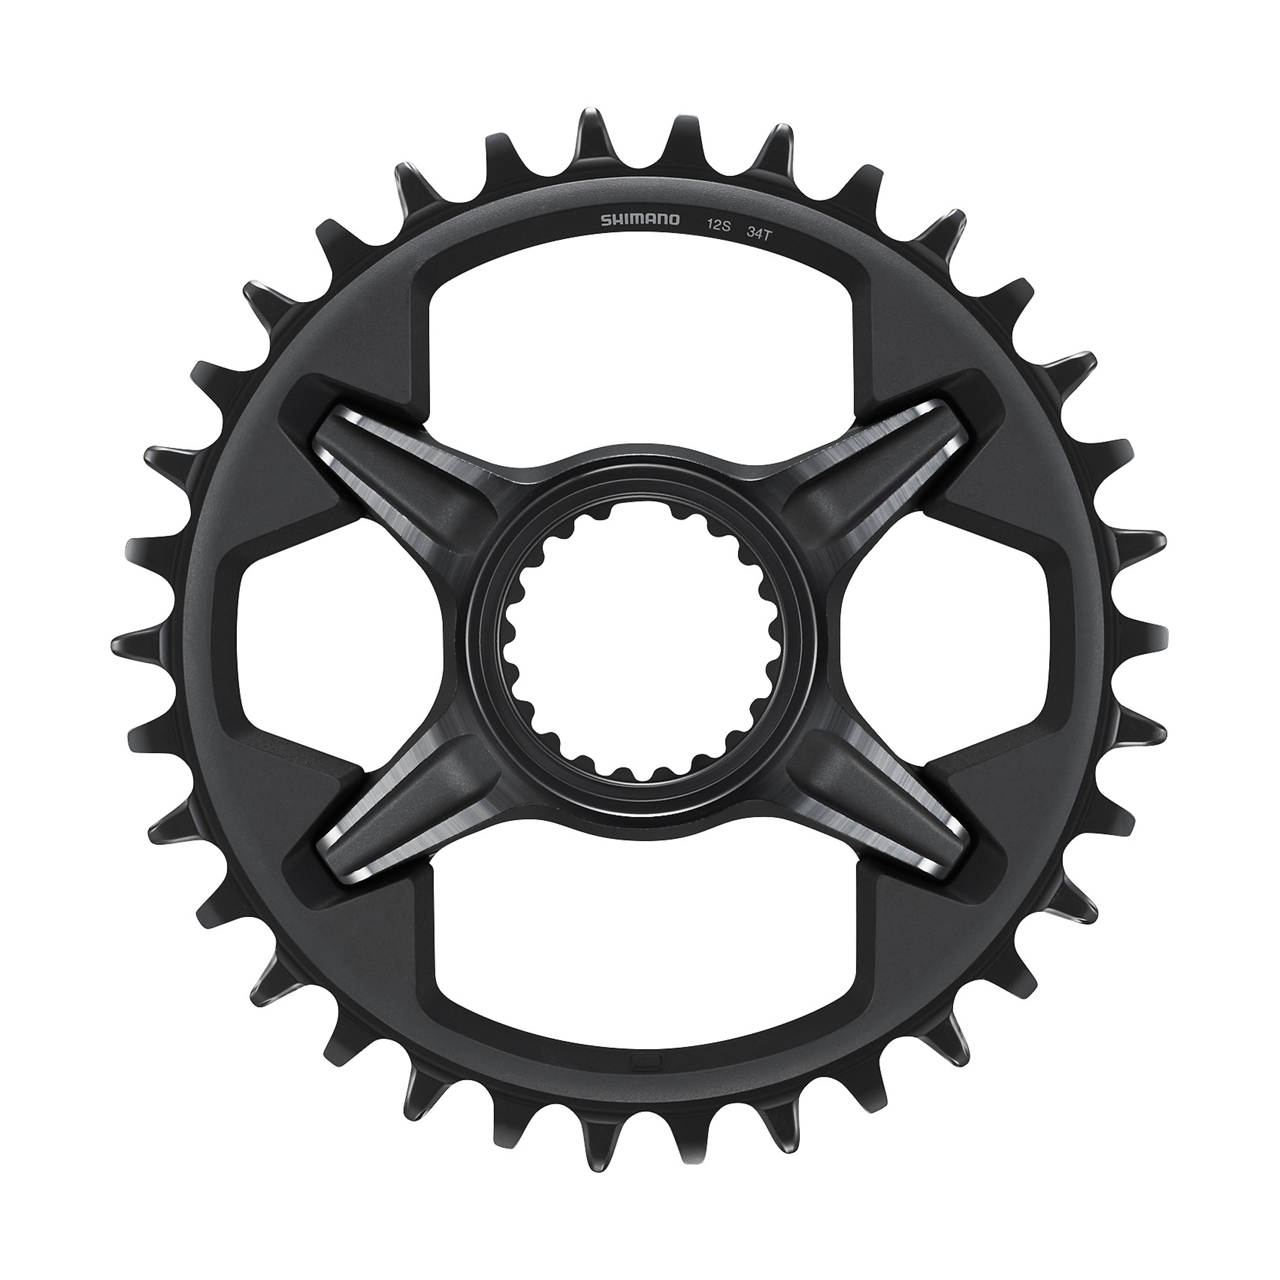 SHIMANO DEORE XT CHAINRING 12 SPEED